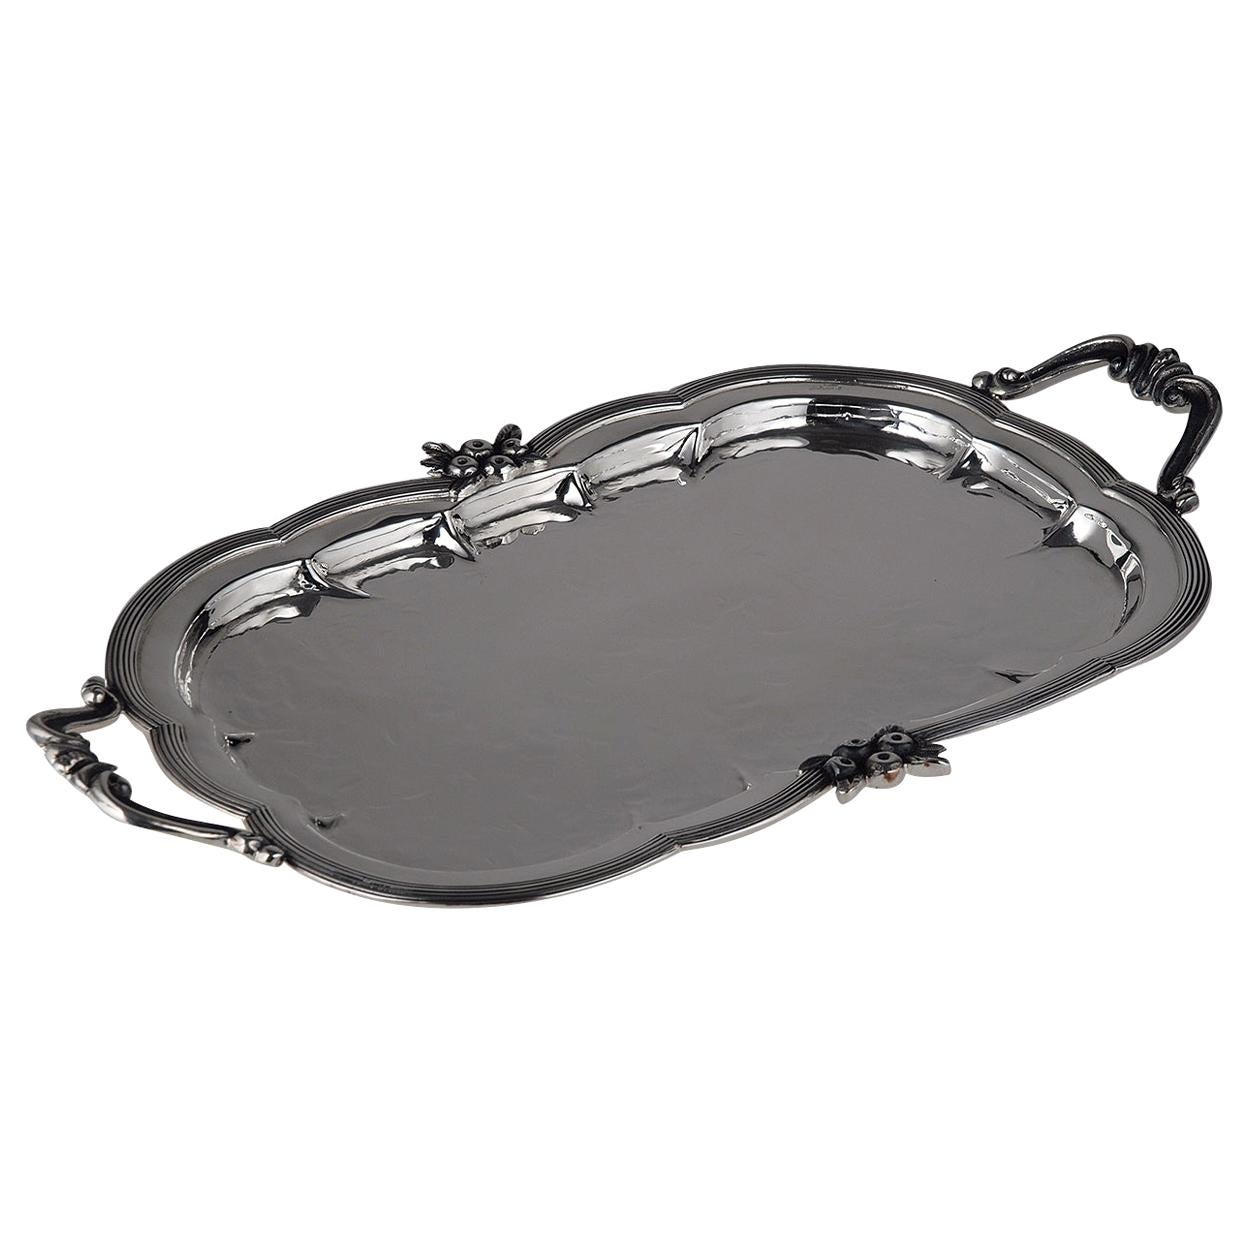 This elegant tray will enrich a table and can be also used as a permanent decorative addition to a console or a coffee table to complement a Classic decor. Its shape with round corners is adorned inside with gentle semi-circular dents, while the